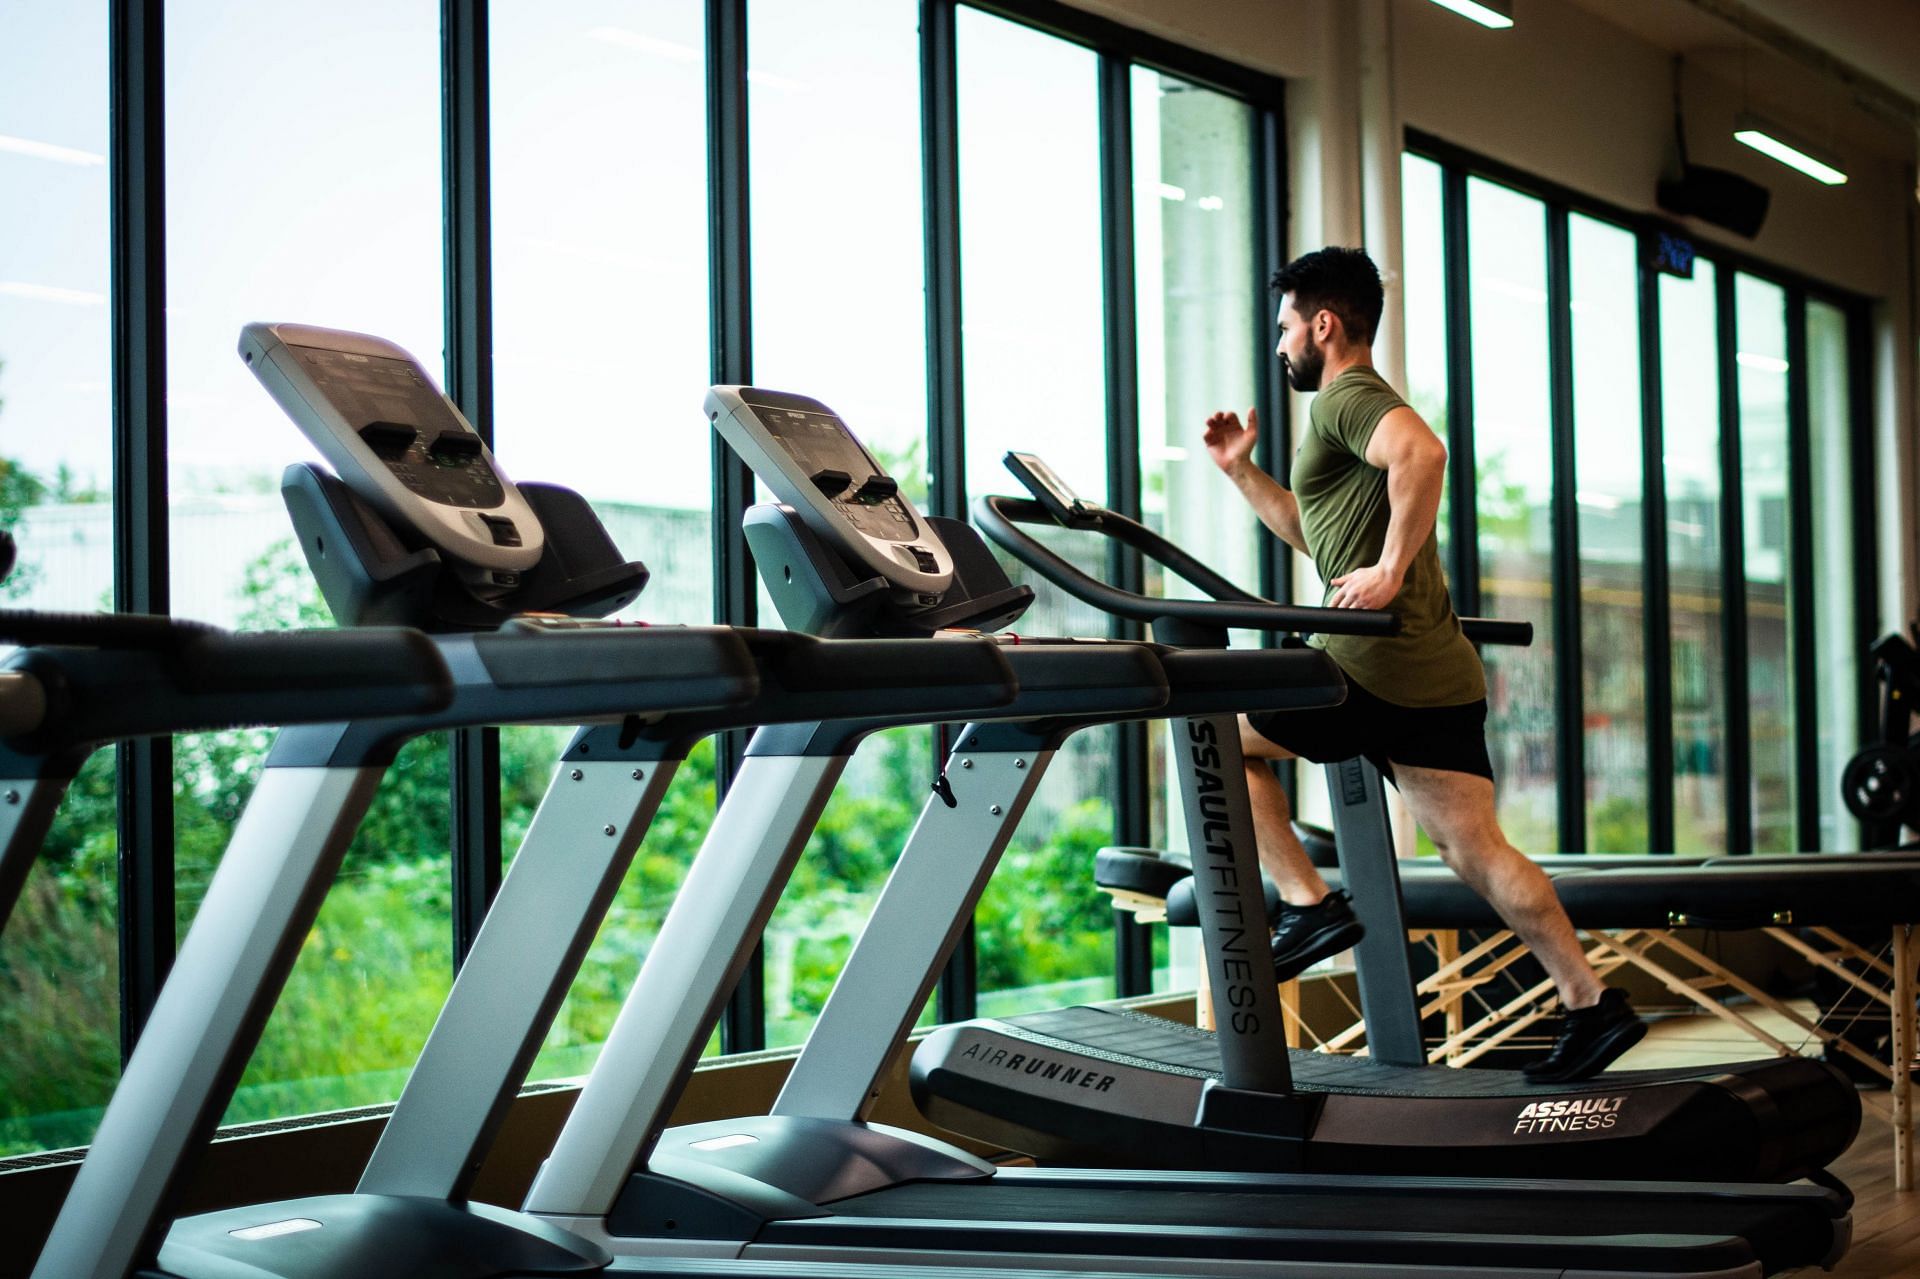 Exercise regularly to keep maintain healthy weight. (Image via Pexels/ William Choquette)